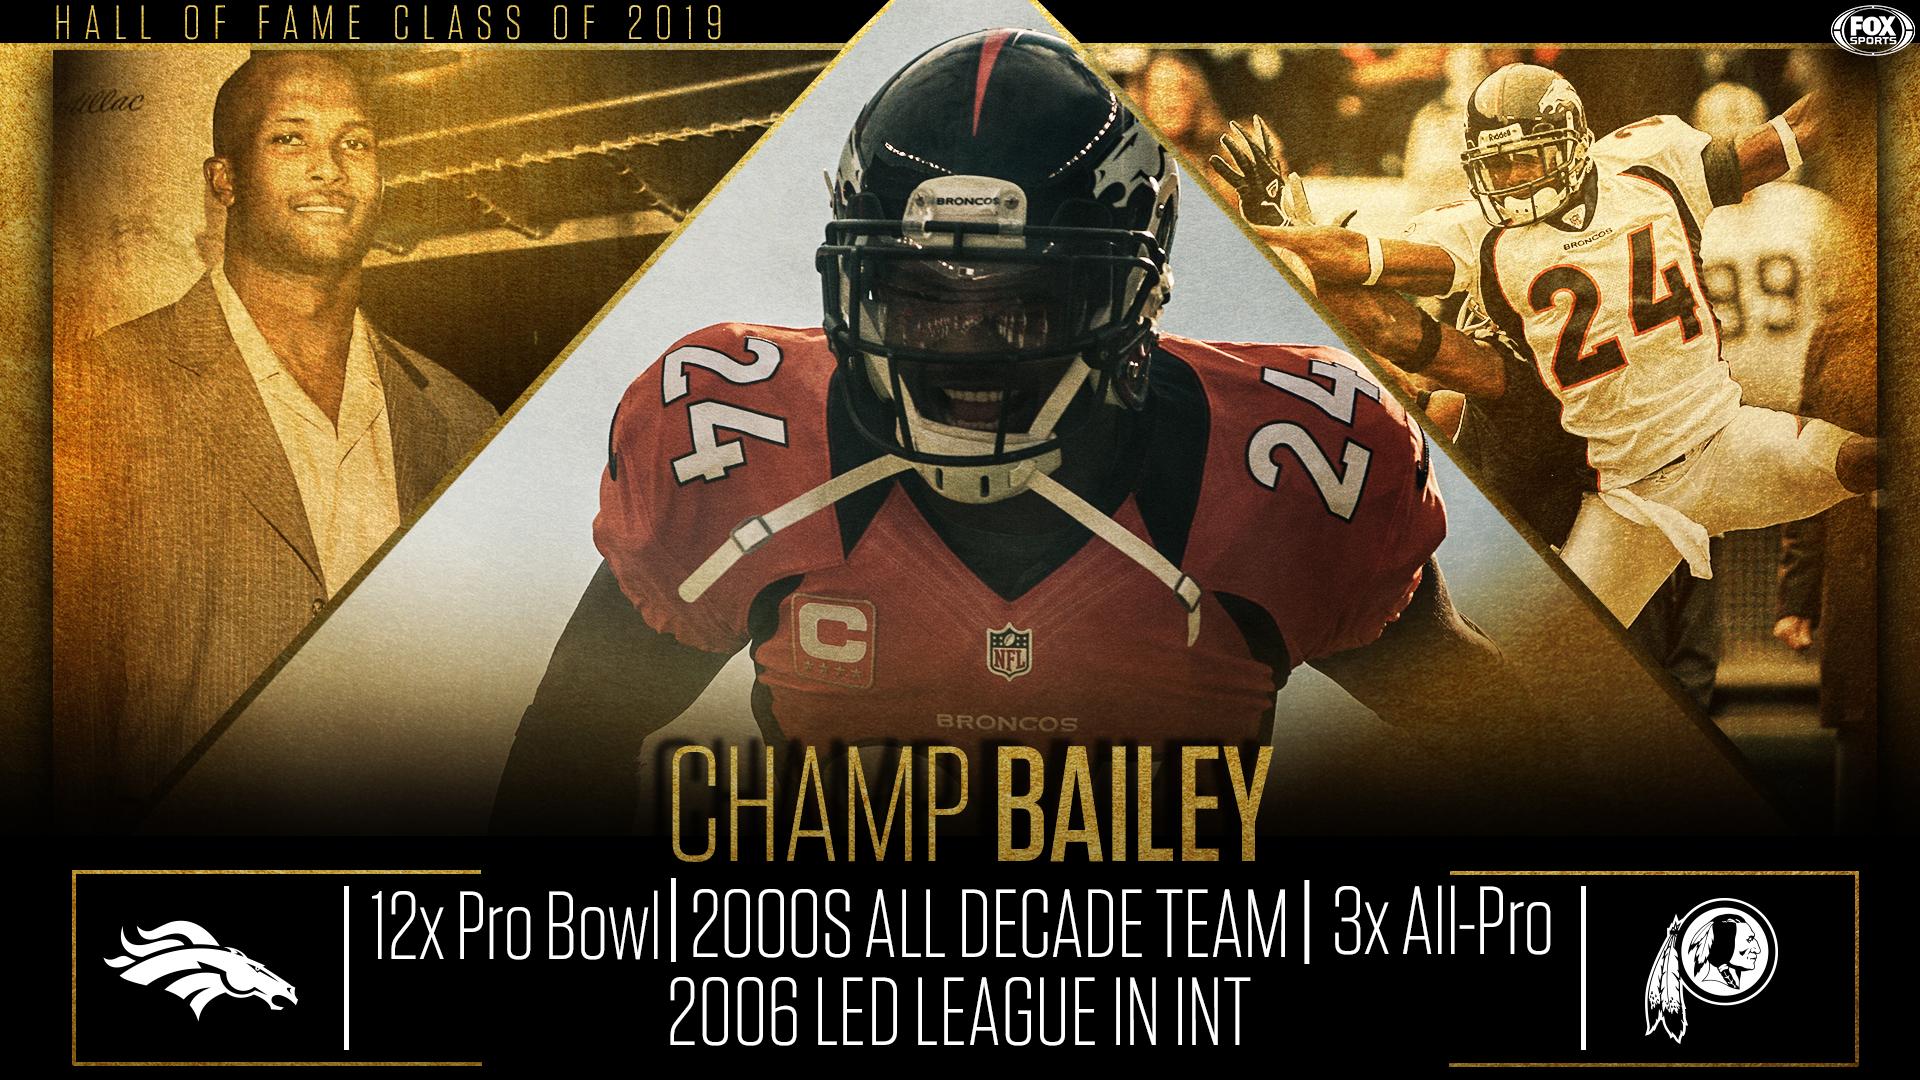 FOX Sports: NFL Bailey has been inducted into the Pro Football Hall of Fame, Class of 2019!